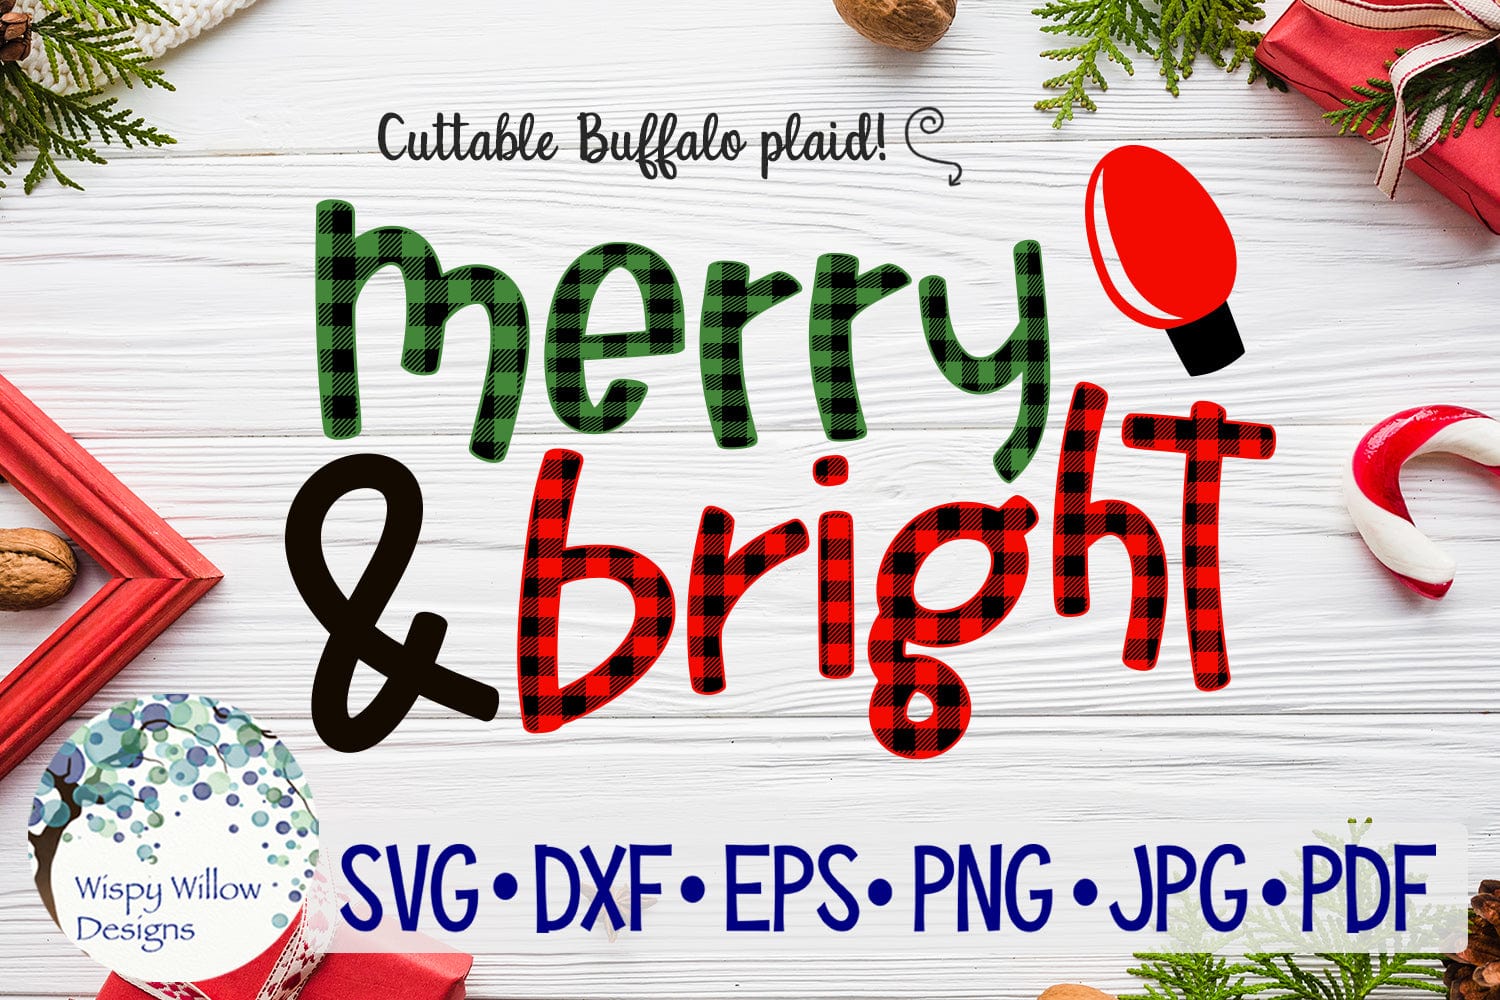 Buffalo Plaid Merry and Bright SVG Wispy Willow Designs Company